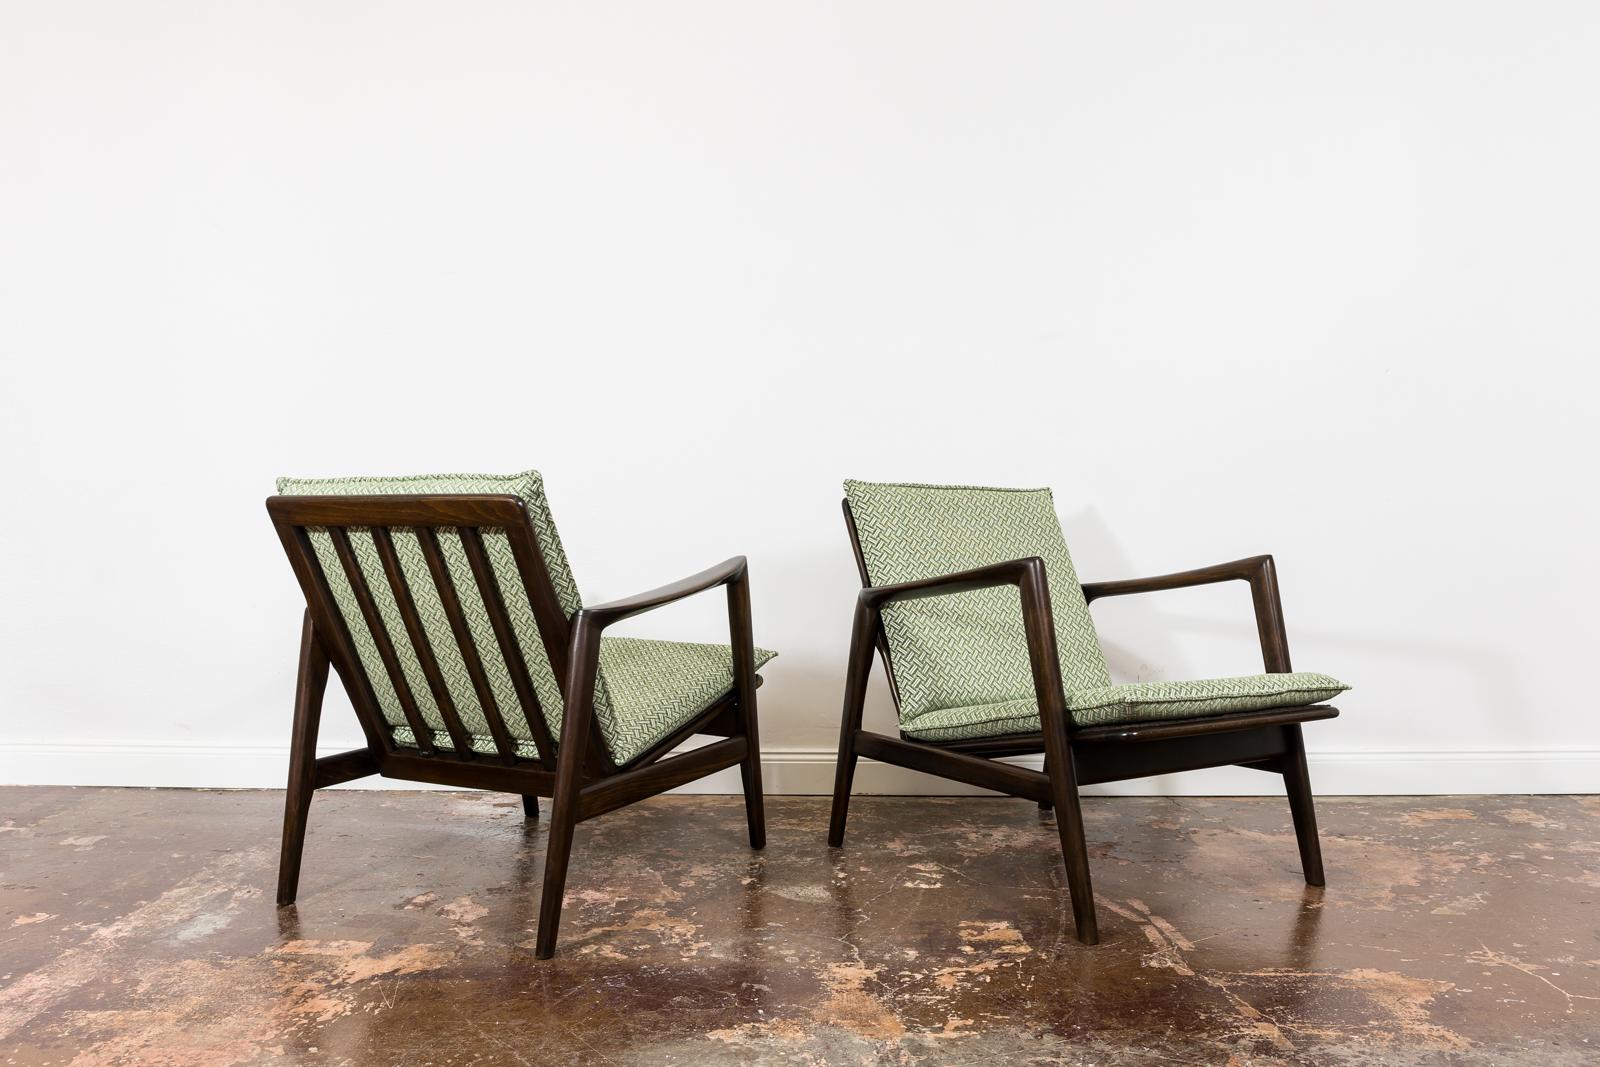 Pair of Mid Century Modern Armchairs Type 300-130, 1960s, Poland For Sale 1